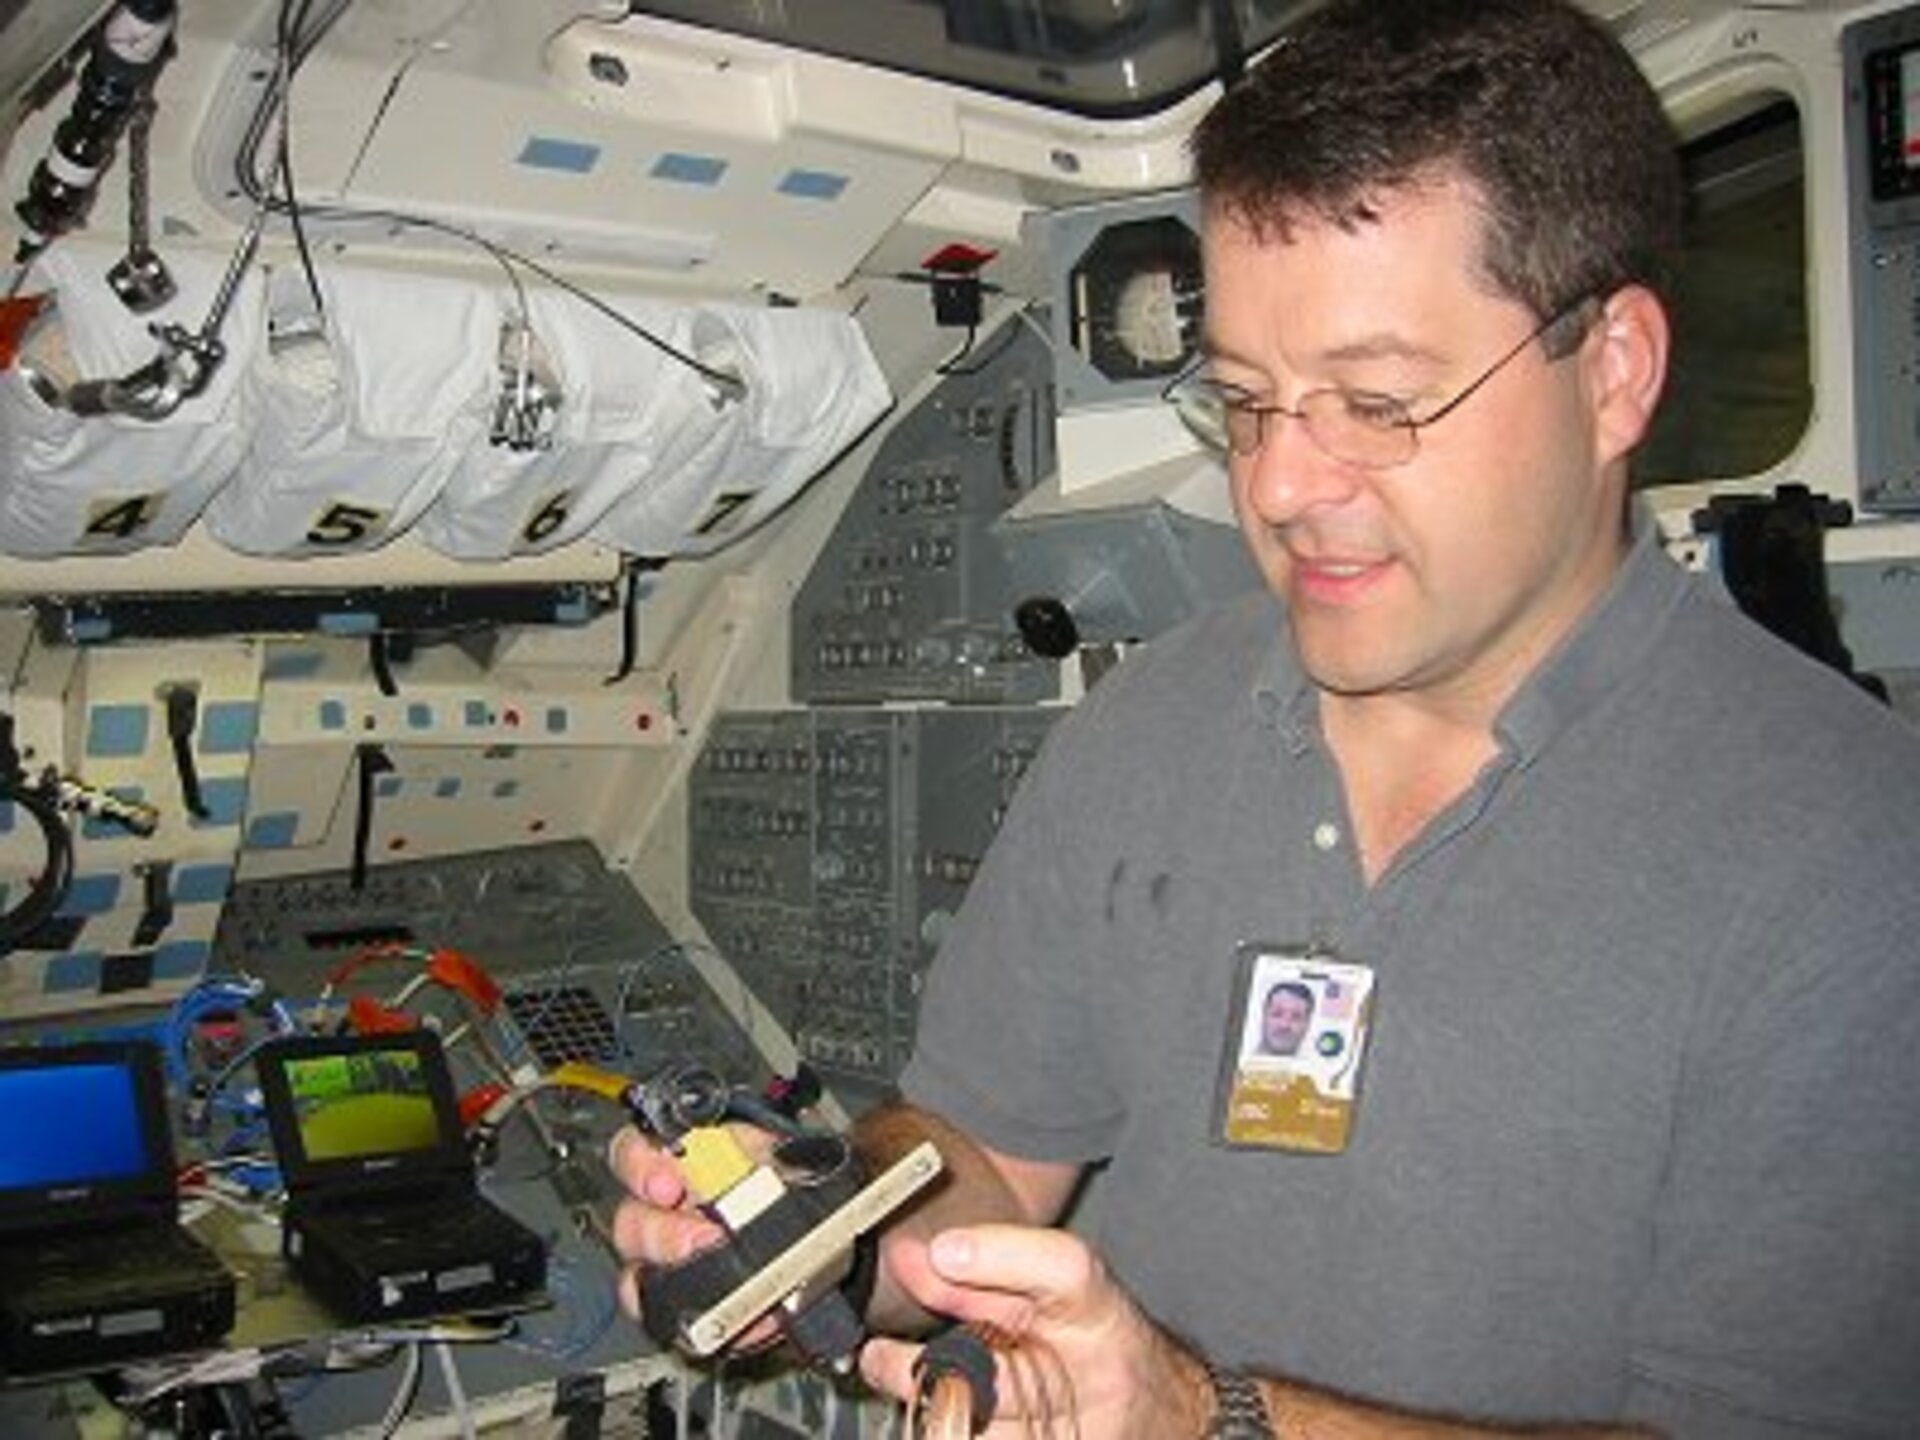 Nick, yesterday, during the last practice exercise in the Space Shuttle simulator, which I participated in.